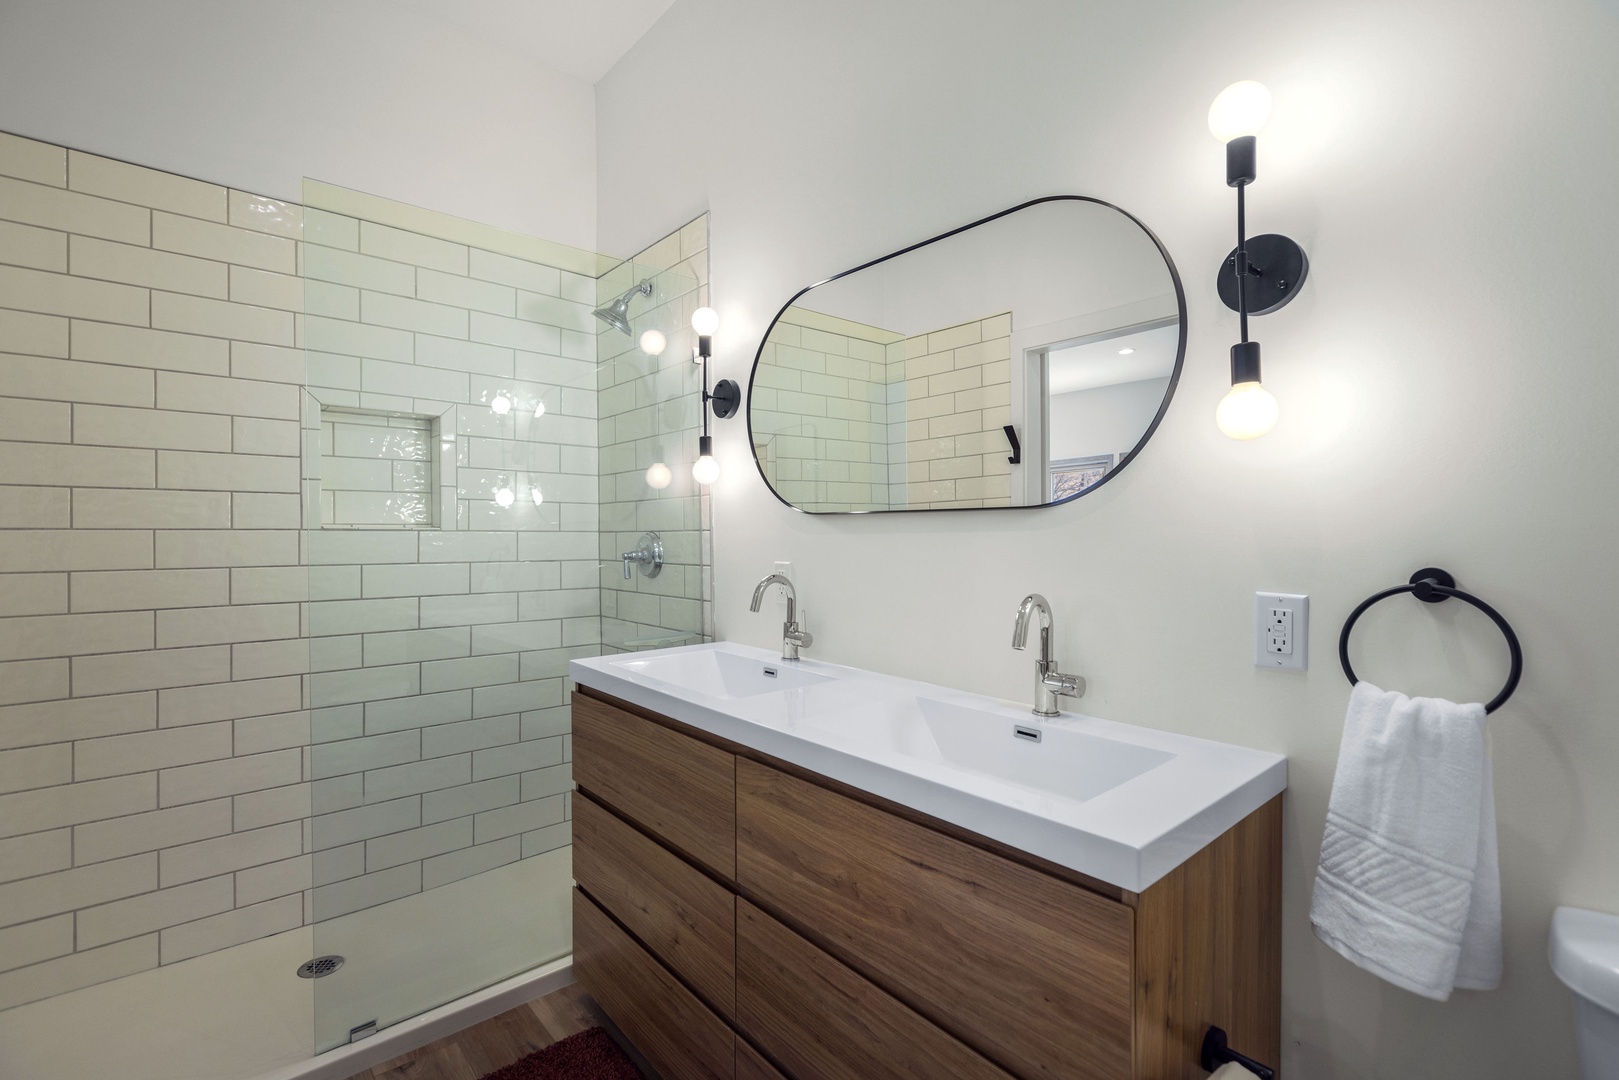 The second full bathroom includes a double vanity & sap like glass-shower